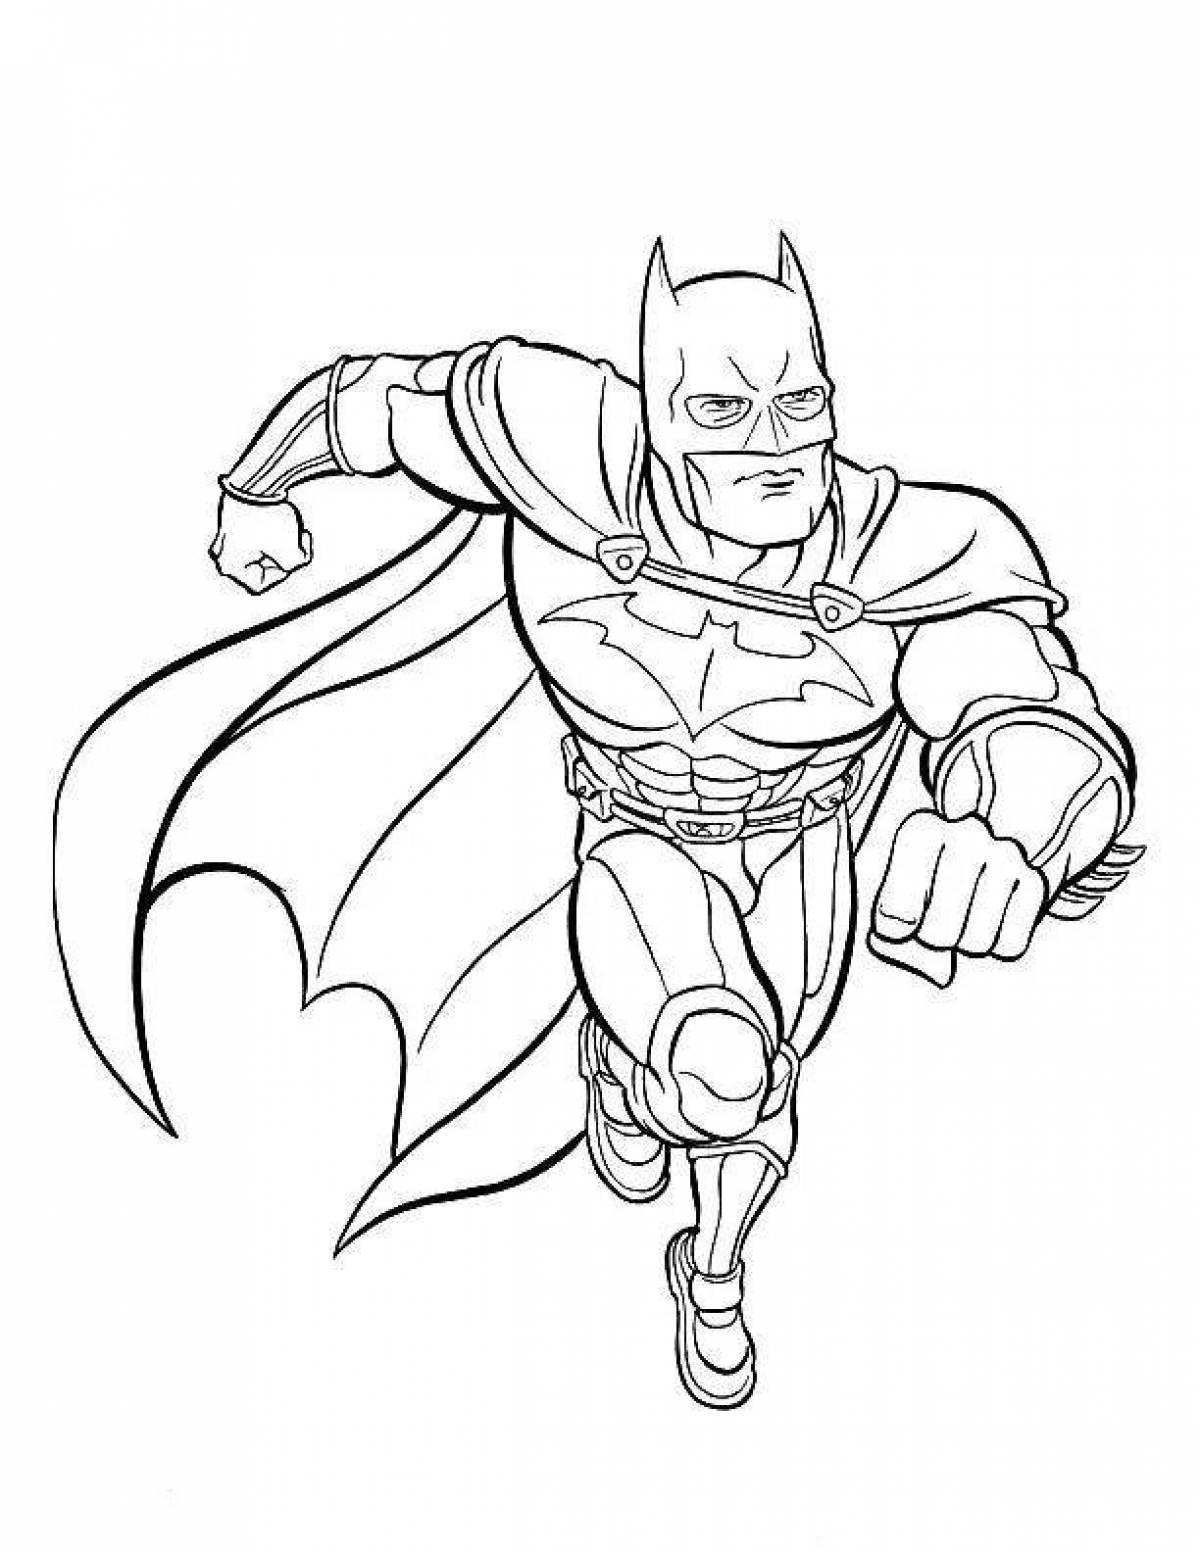 Coloring page dazzling batman and spider-man